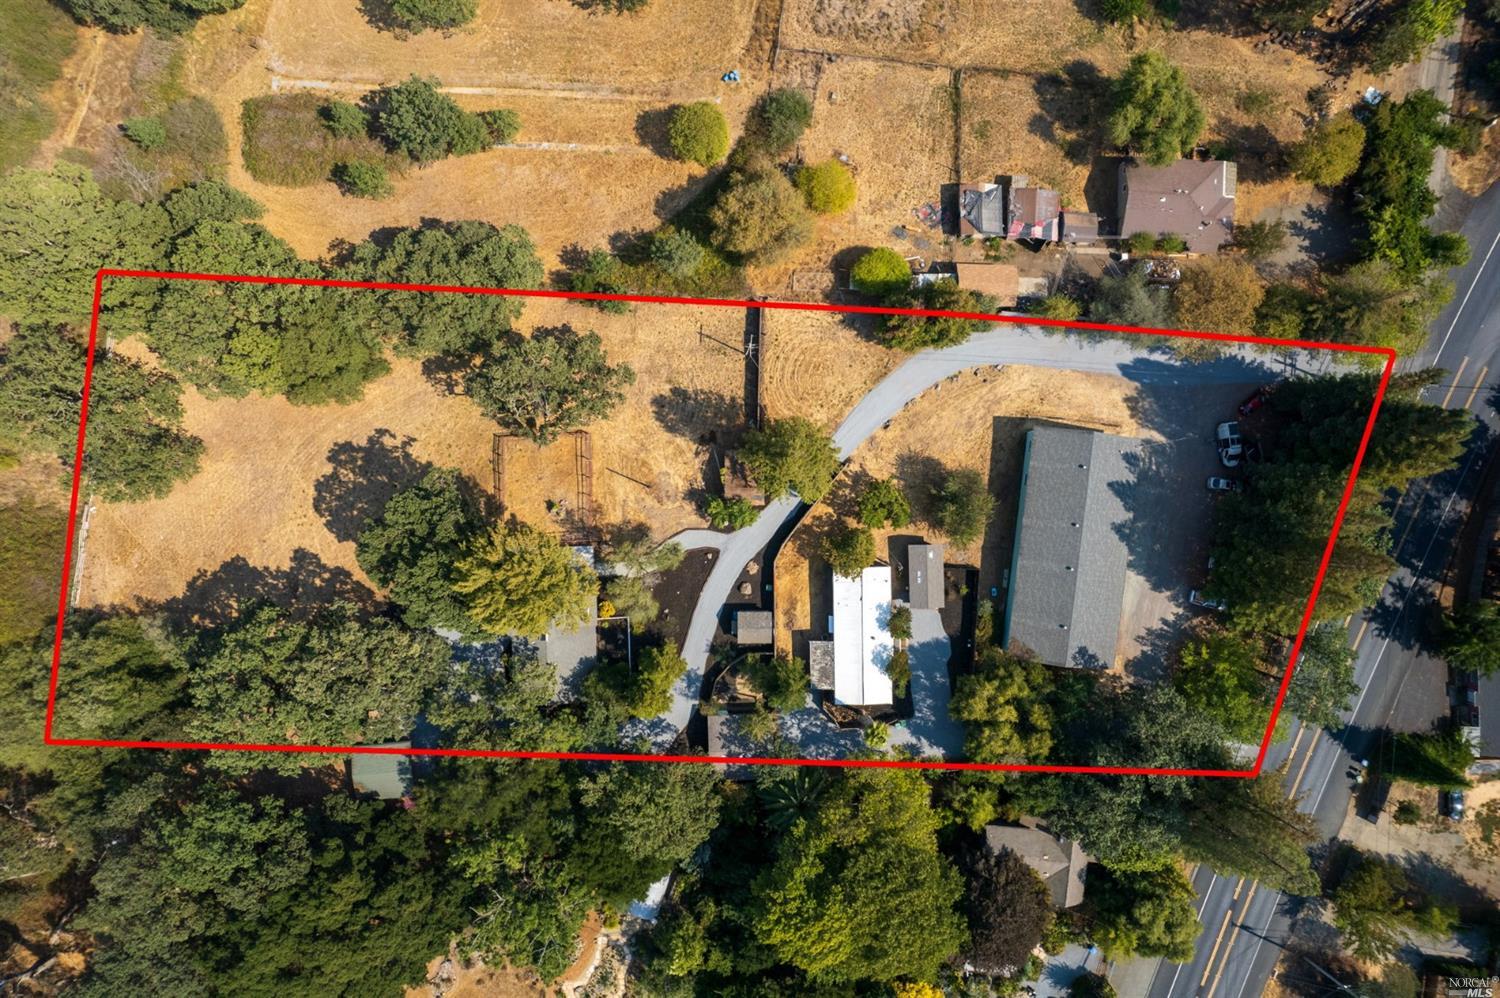 This very special multi unit property can be your family compound as well as the location for your business.  SO many uses and possibilities with this property with 3 dwellings, large warehouse and room to roam.